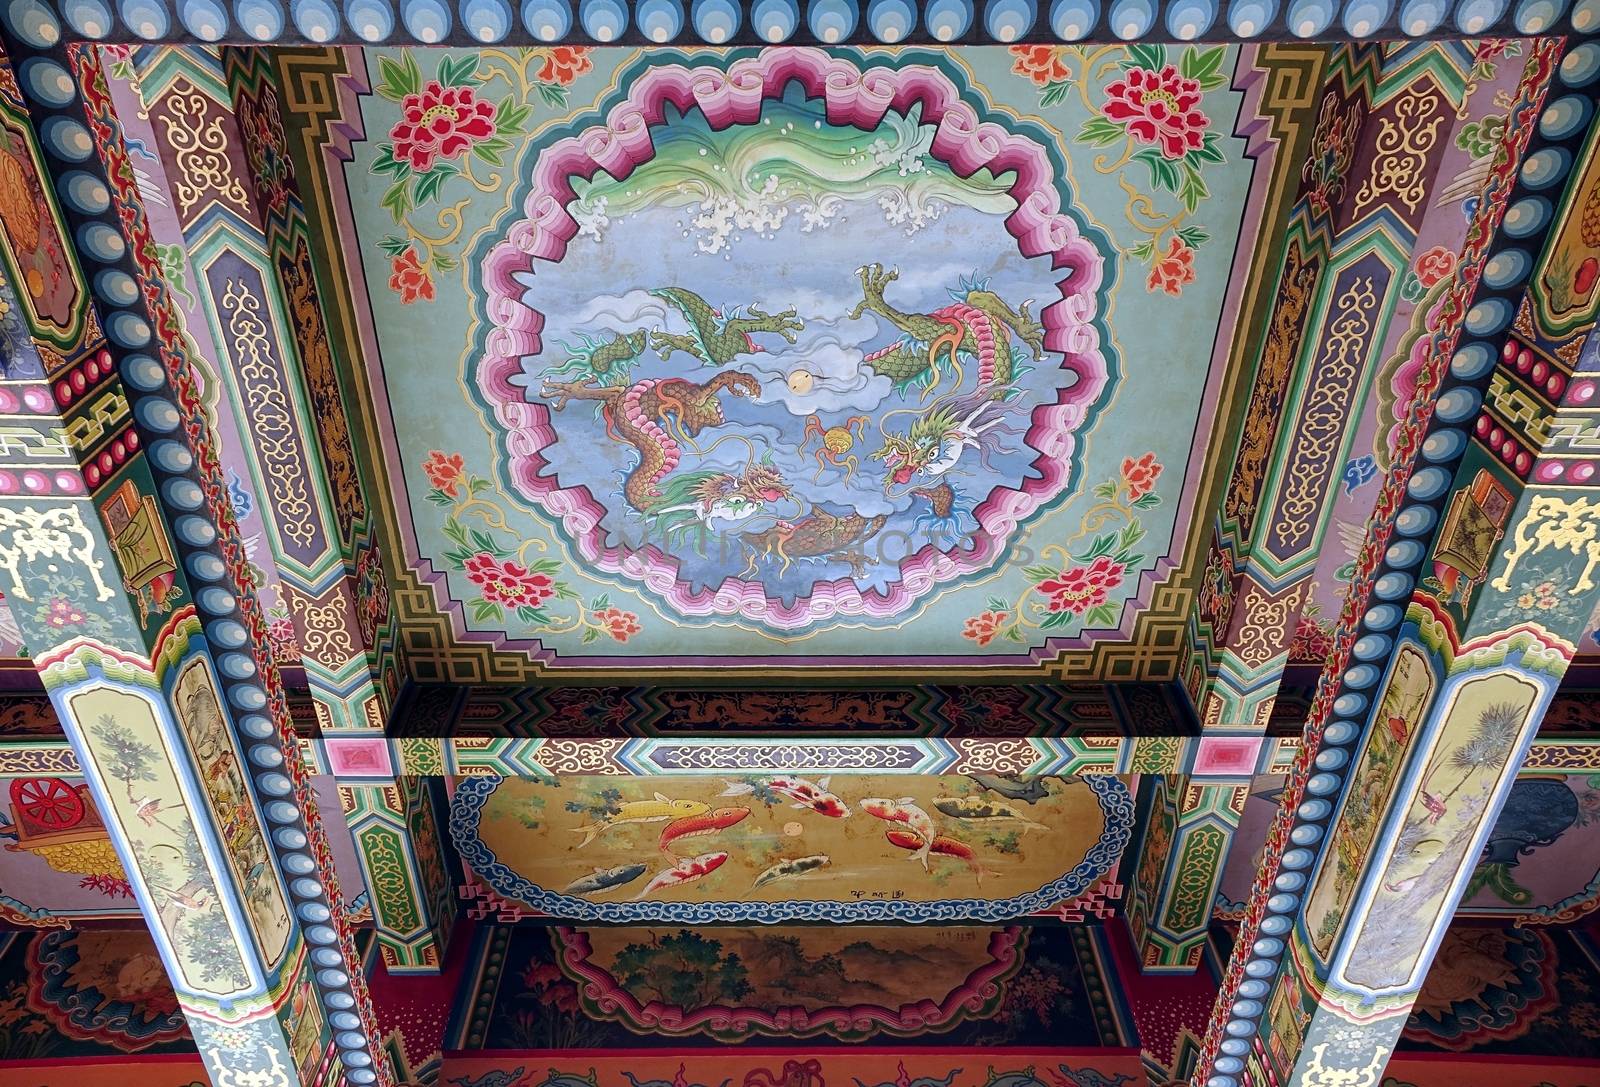 KAOHSIUNG, TAIWAN -- JUNE 24, 2014: The ceiling of the Wumiao Temple in Kaohsiung shows colorful paintings of religious and mythological themes.